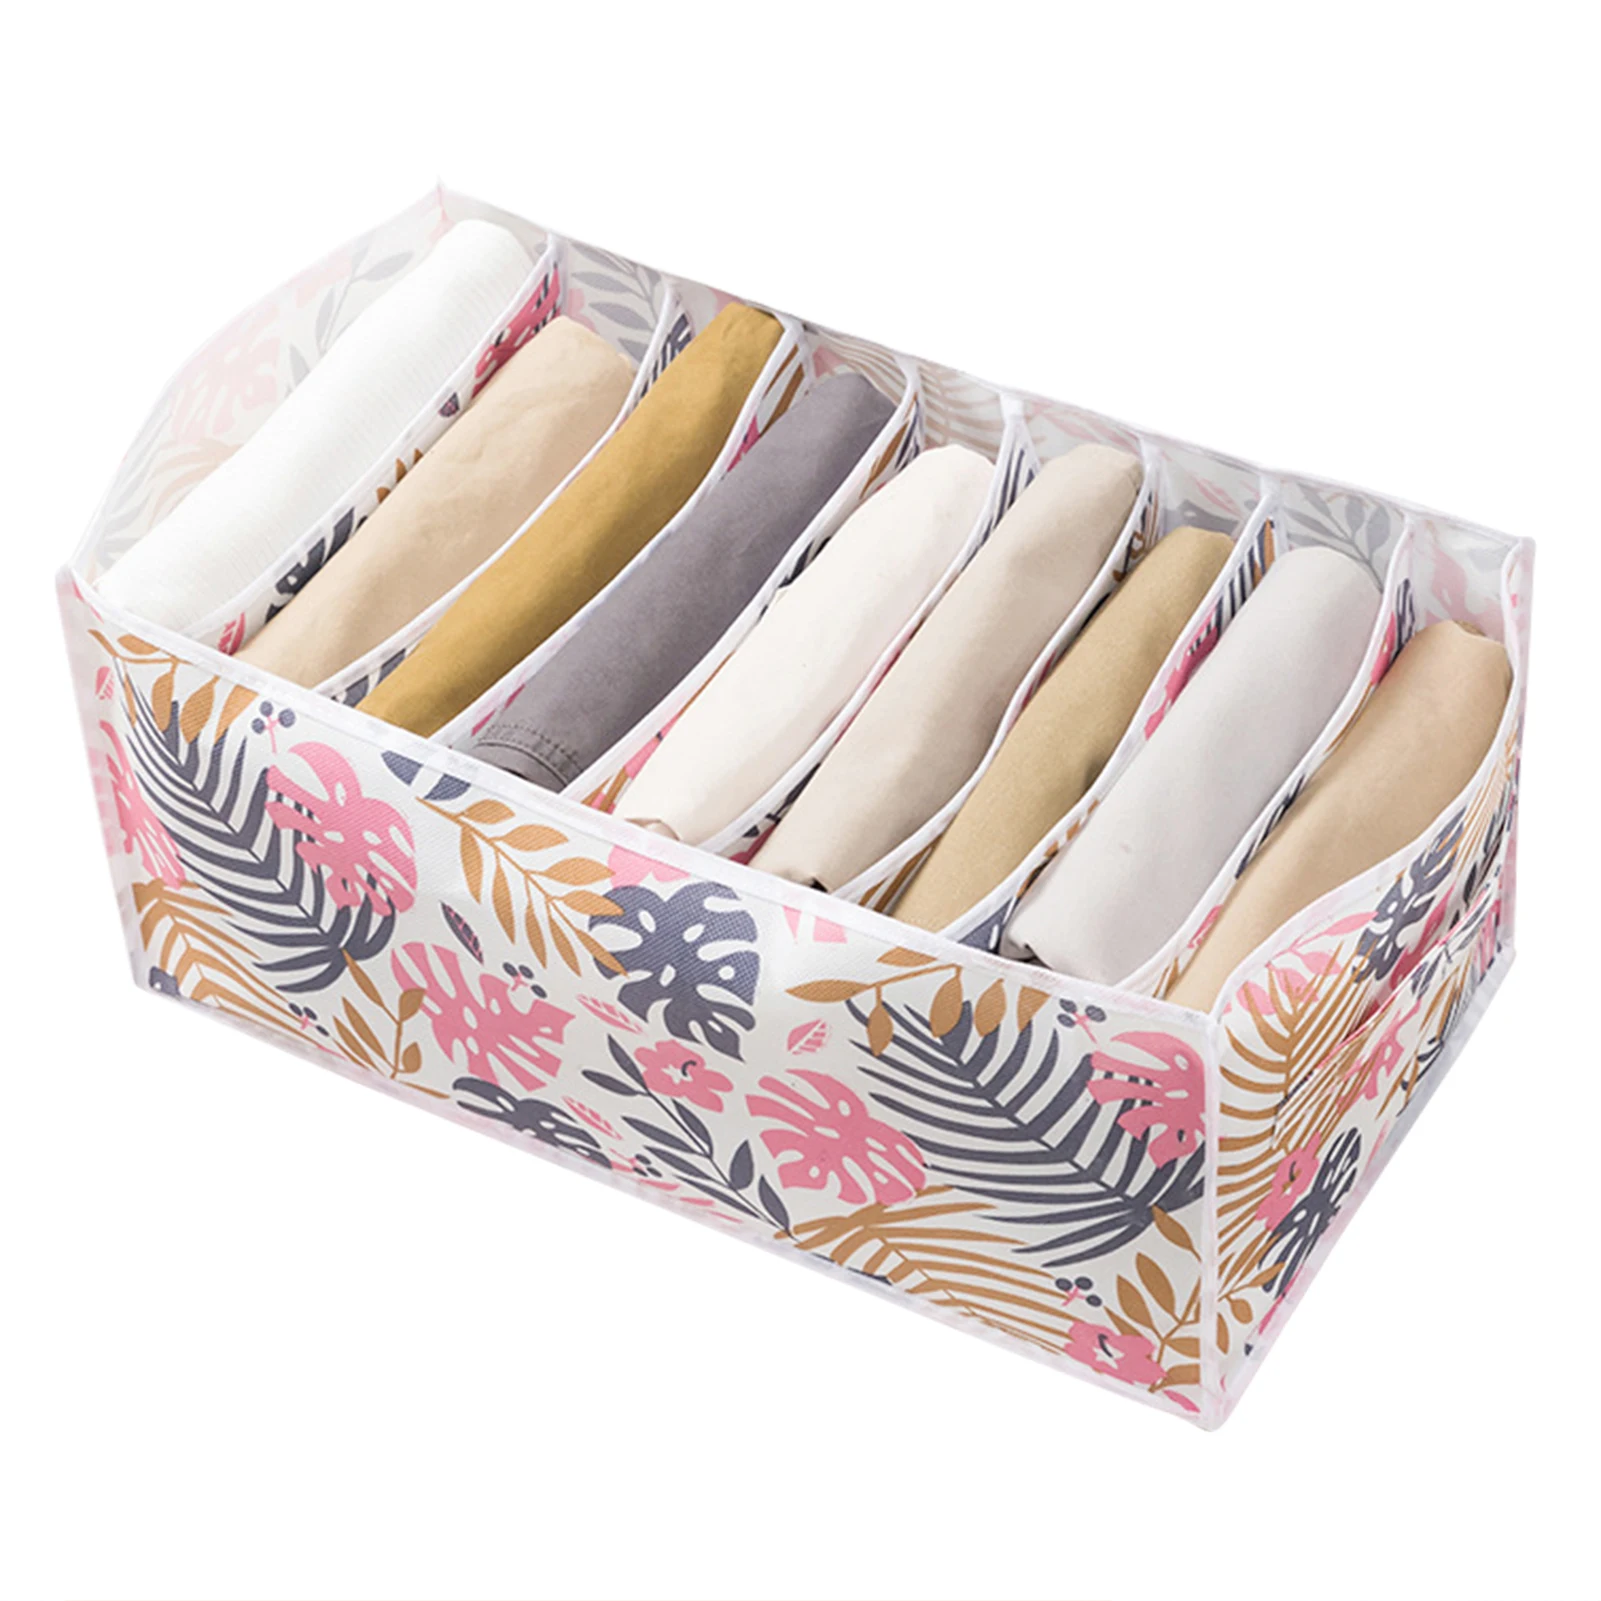 

Collapsible Drawer Organisers Bedroom Collapsible Closet Dividers Foldable Wardrobe Storage Box With Compartment For Underwear